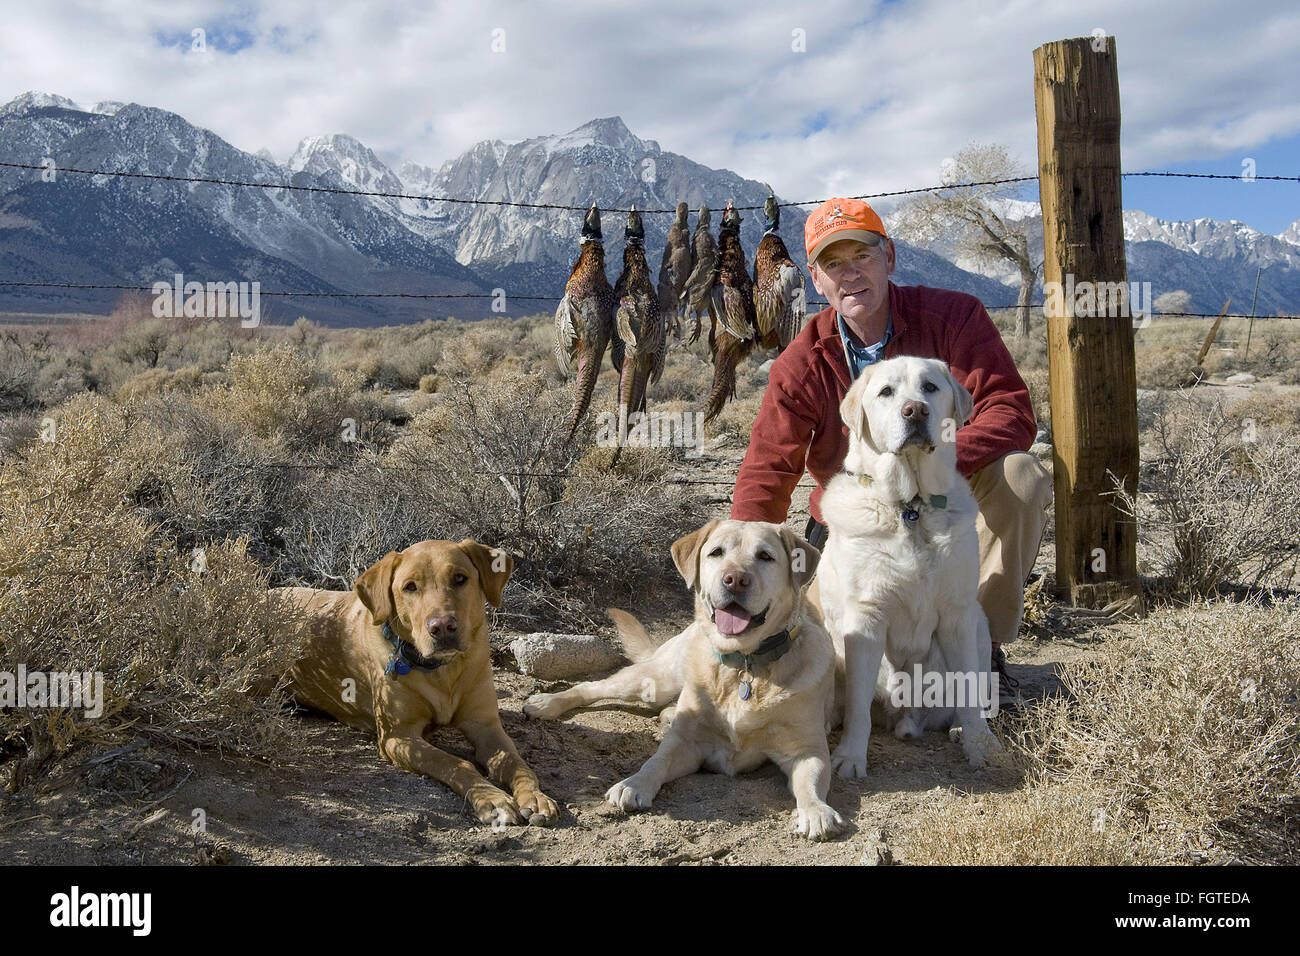 Feb. 22, 2016 - Lone Pine, California, U.S - The Labrador retriever is America's most popular dog breed for the 25th consecutive year, the American Kennel Club announced Monday. FILE 2013  Roxy, Scout, Teddy and fellow hunter NICHOLAS STADDON pose with the day's harvest of pheasants at a Lone Pine ranch. Roxy, the fox-red rescue Lab may have the best nose for game of them all. Photographer Jebb Harris has been living with Labradors for over 25 years. (Credit Image: © Jebb Harris via ZUMA Wire) Stock Photo